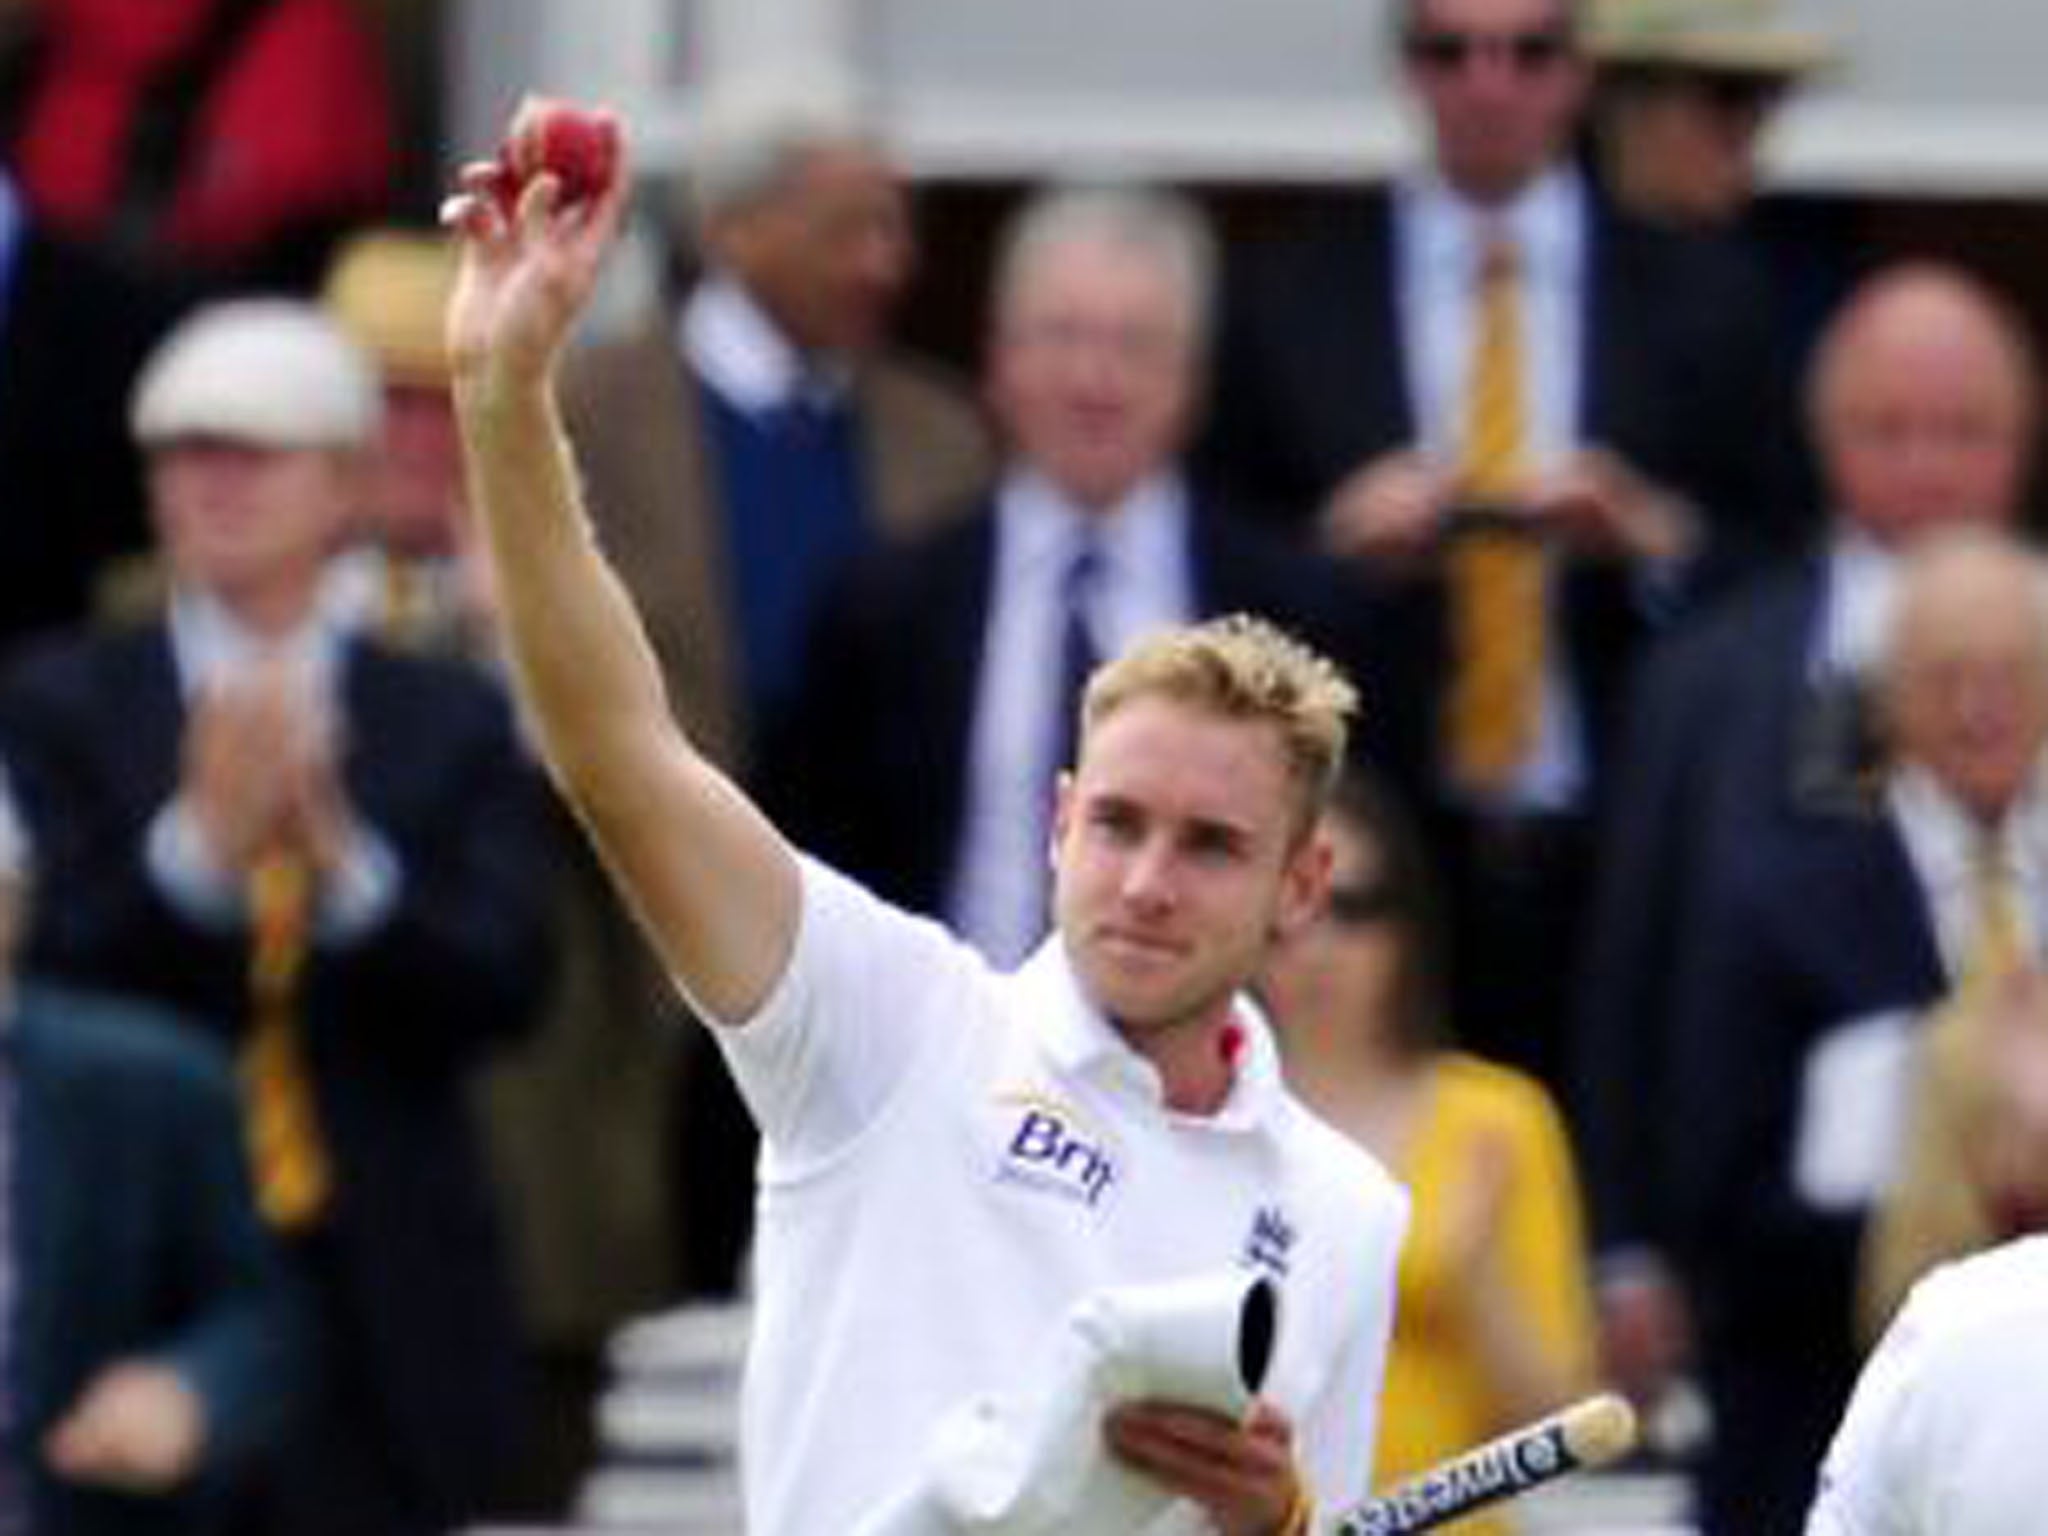 Stuart Broad celebrates his seven-wicket haul after the game is won (Glyn Kirk/AFP/Getty Images)